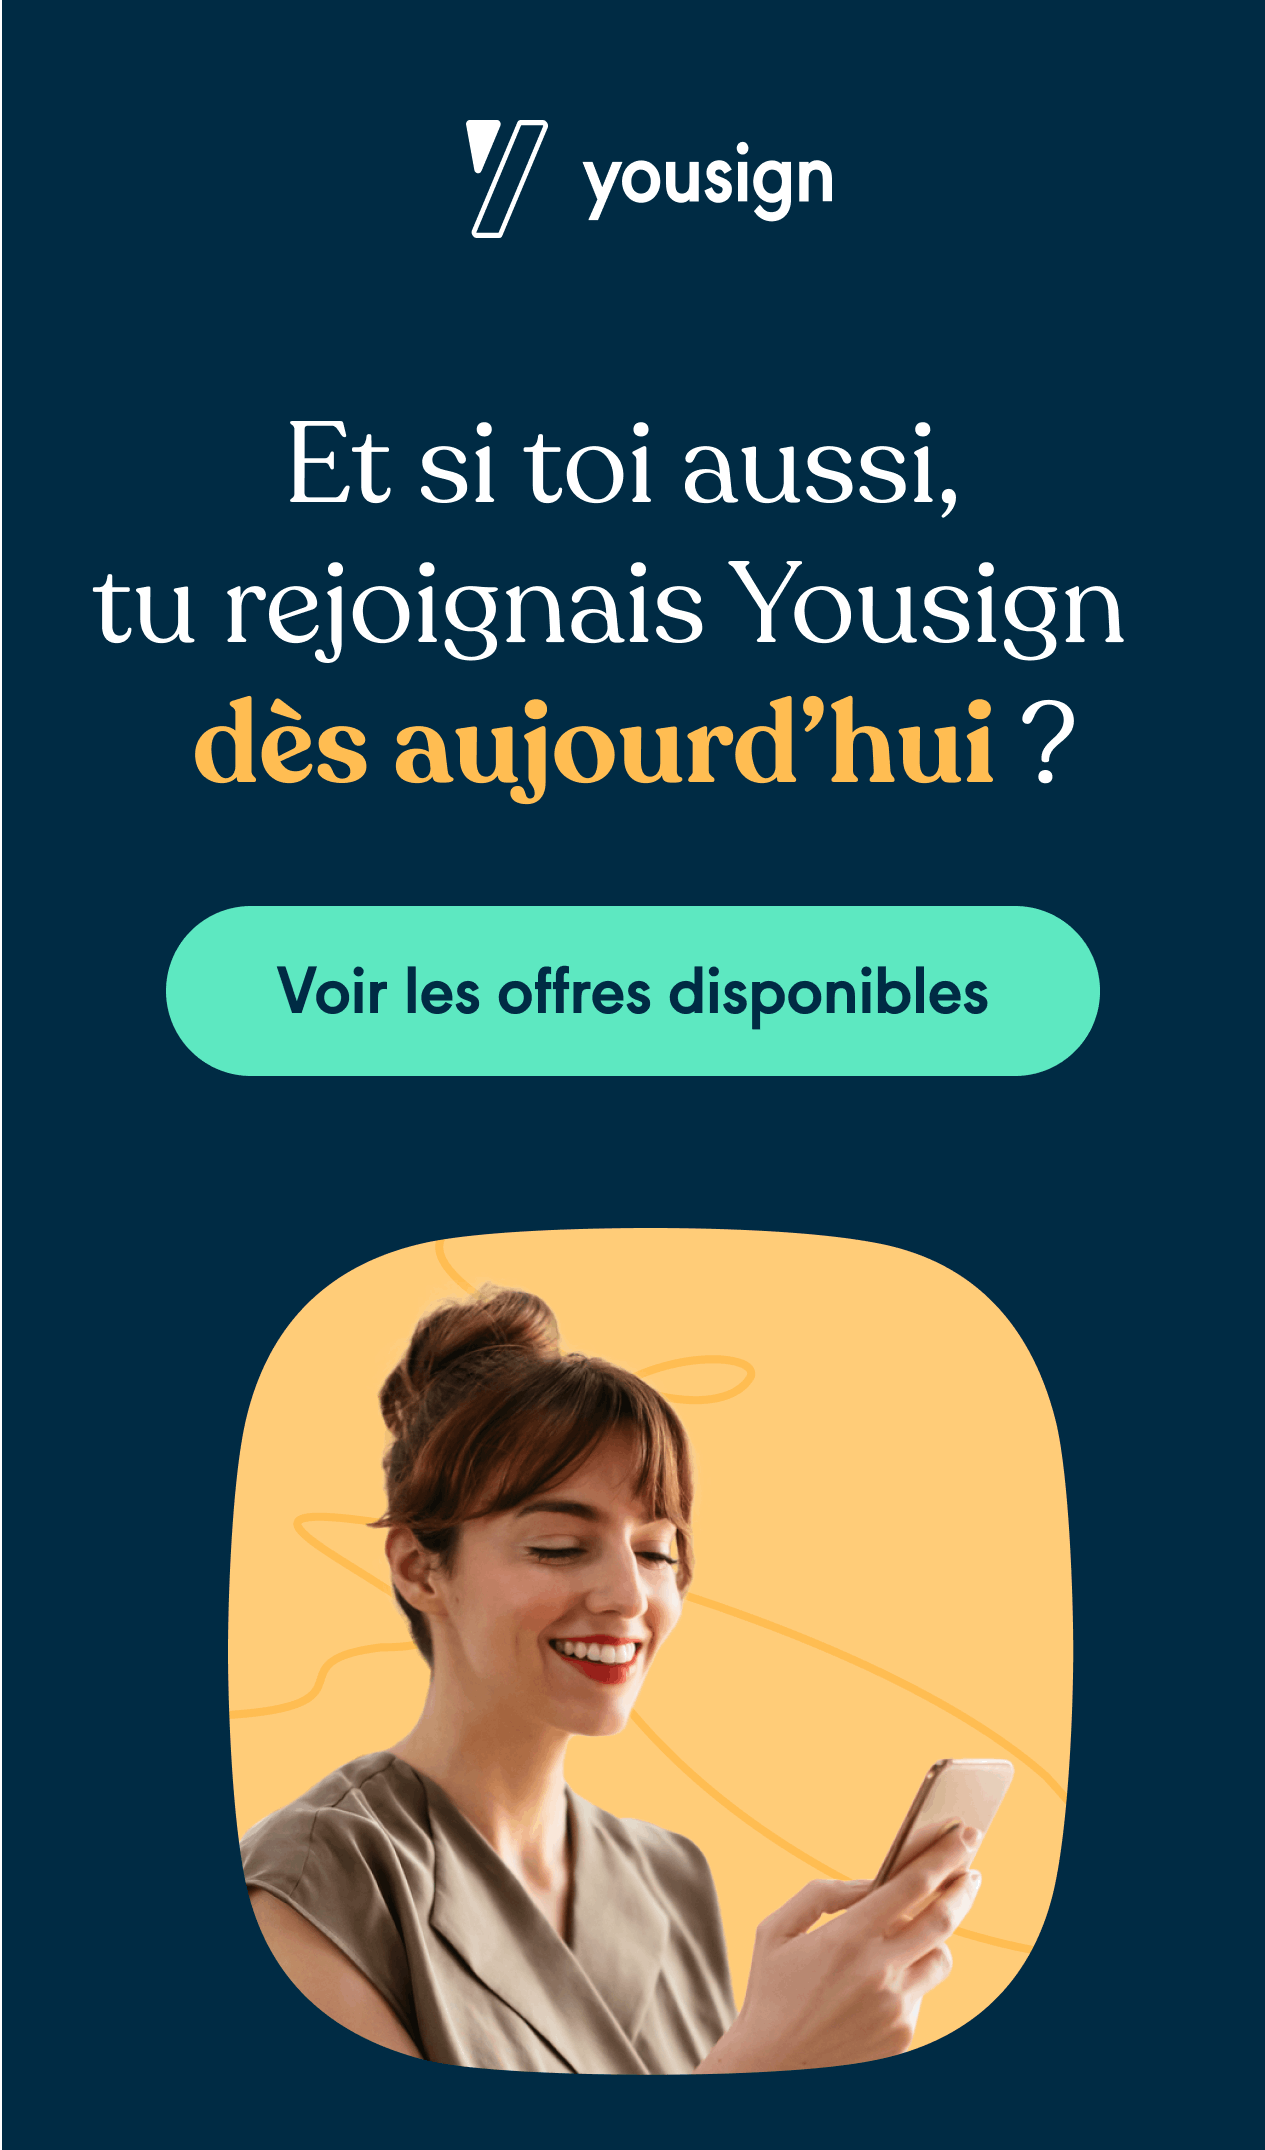 Page recrutement Yousign